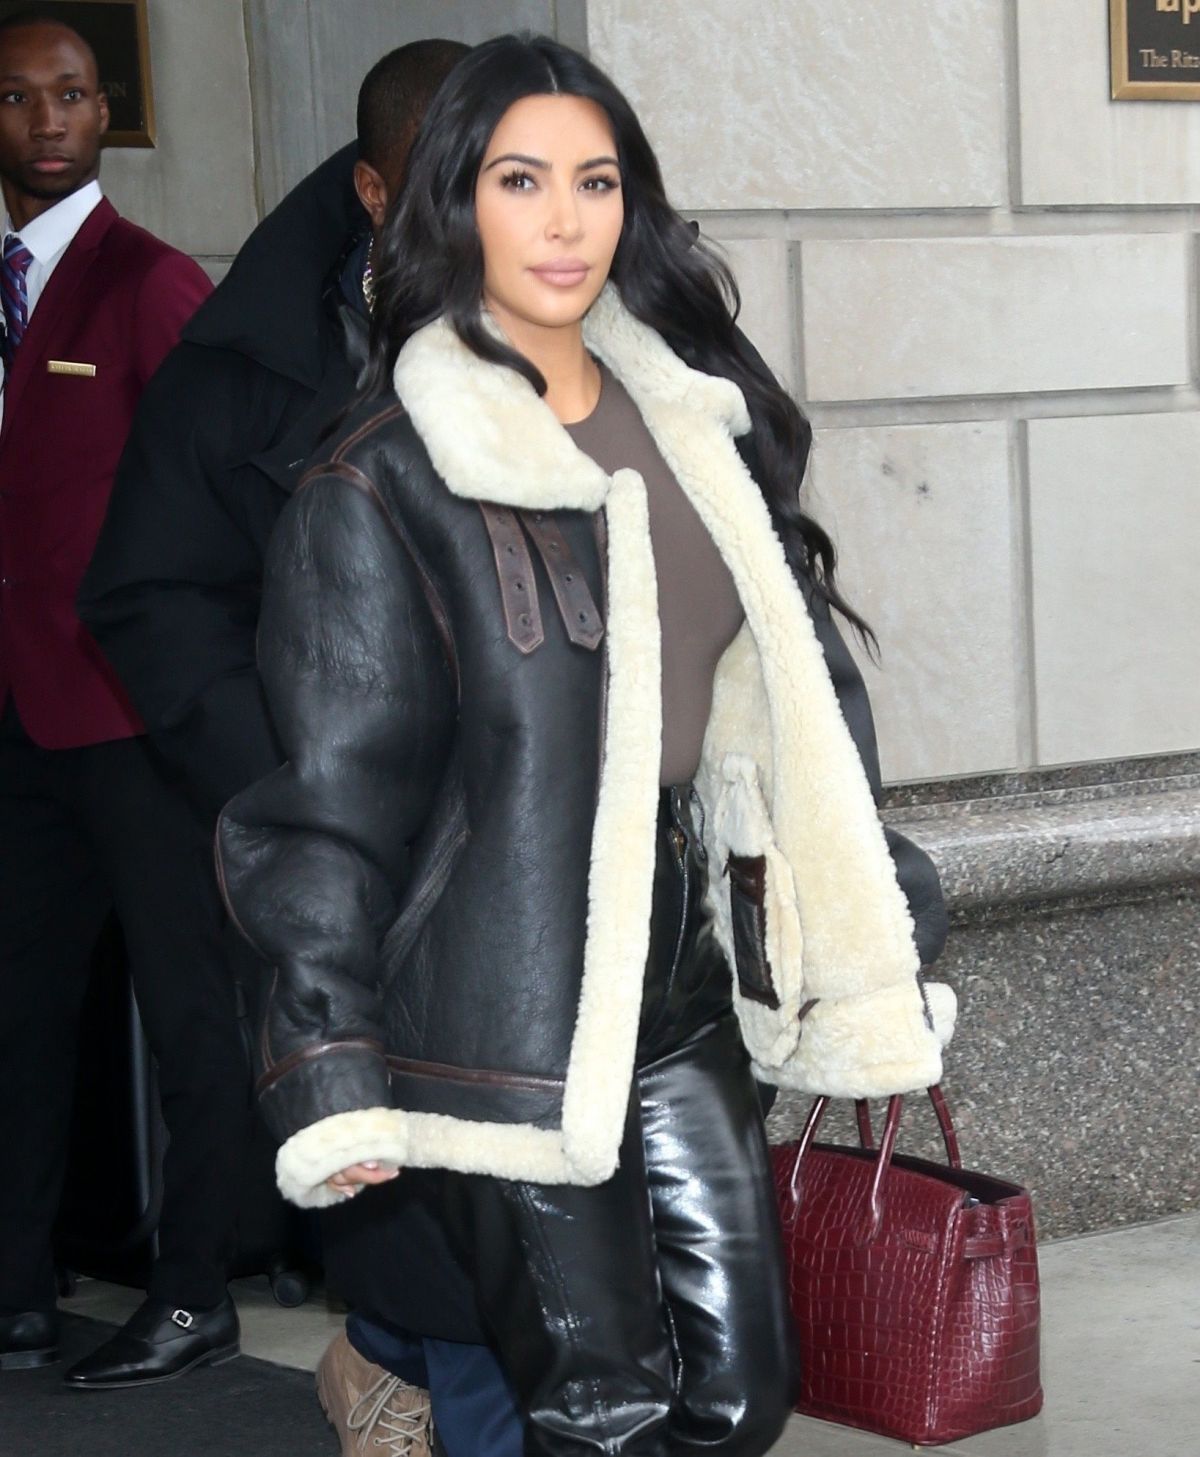 KIM KARDASHIAN Out and About in New York 11/07/2019 – HawtCelebs